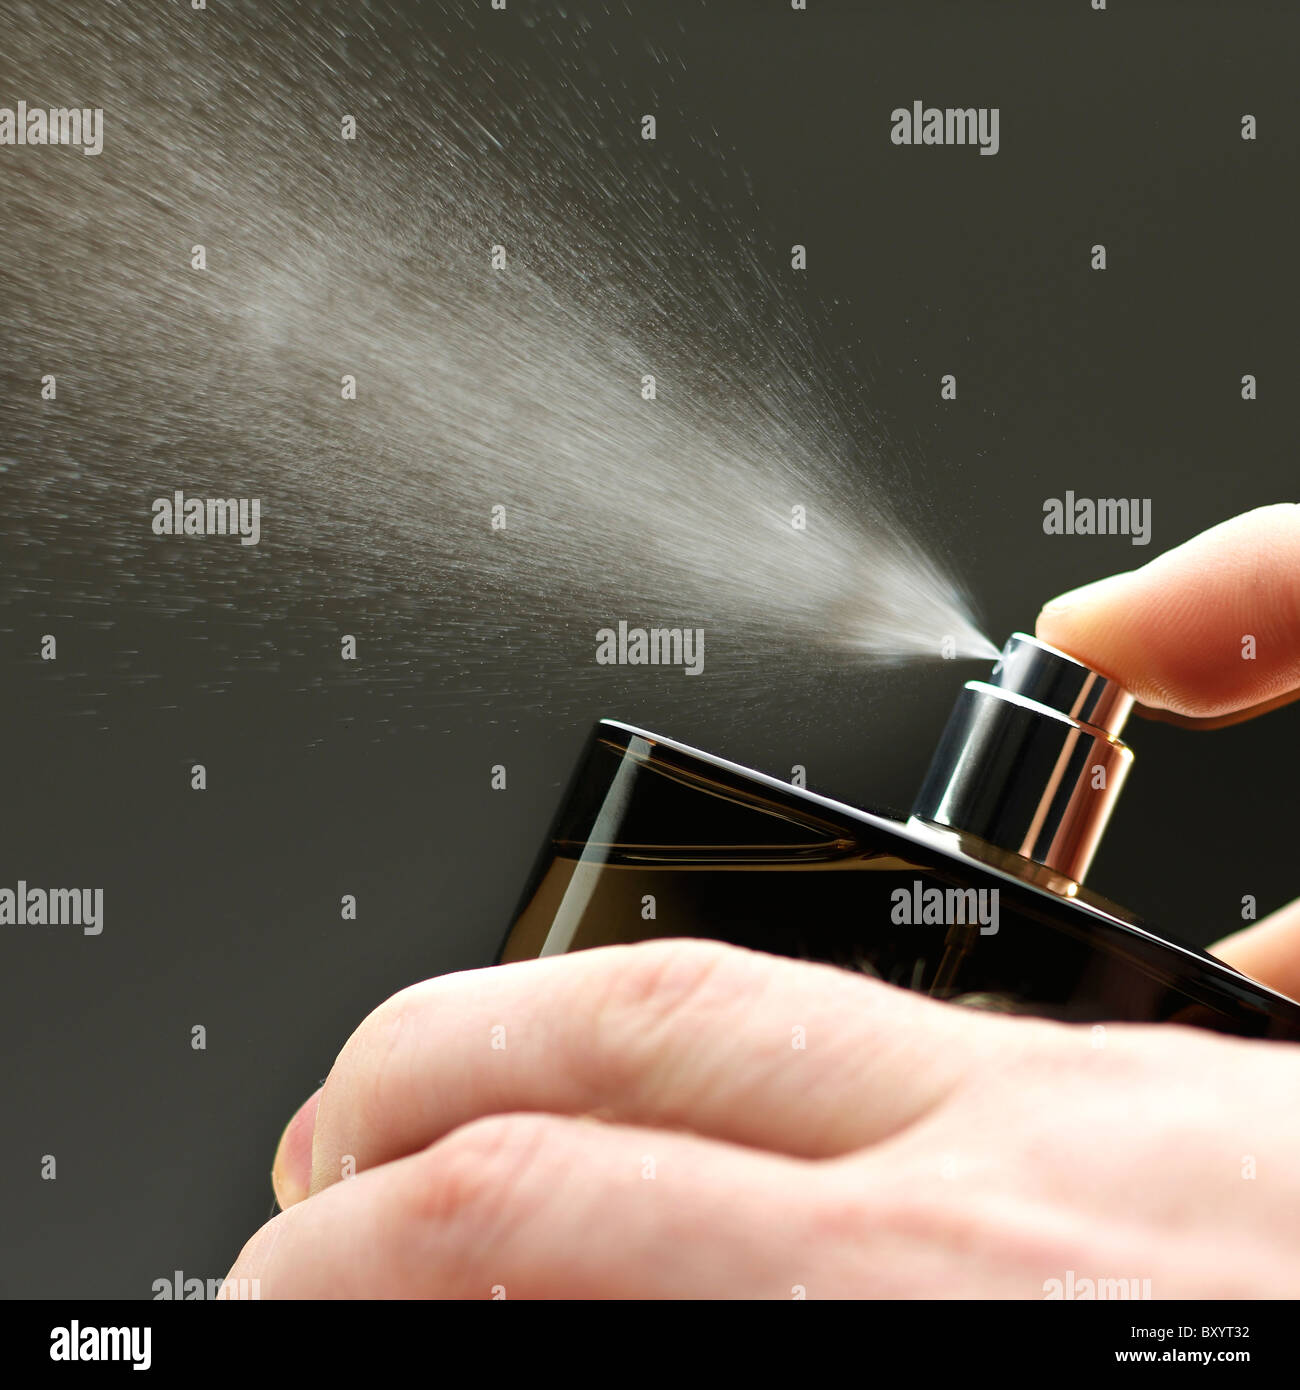 spray from aftershave / perfume bottle Stock Photo